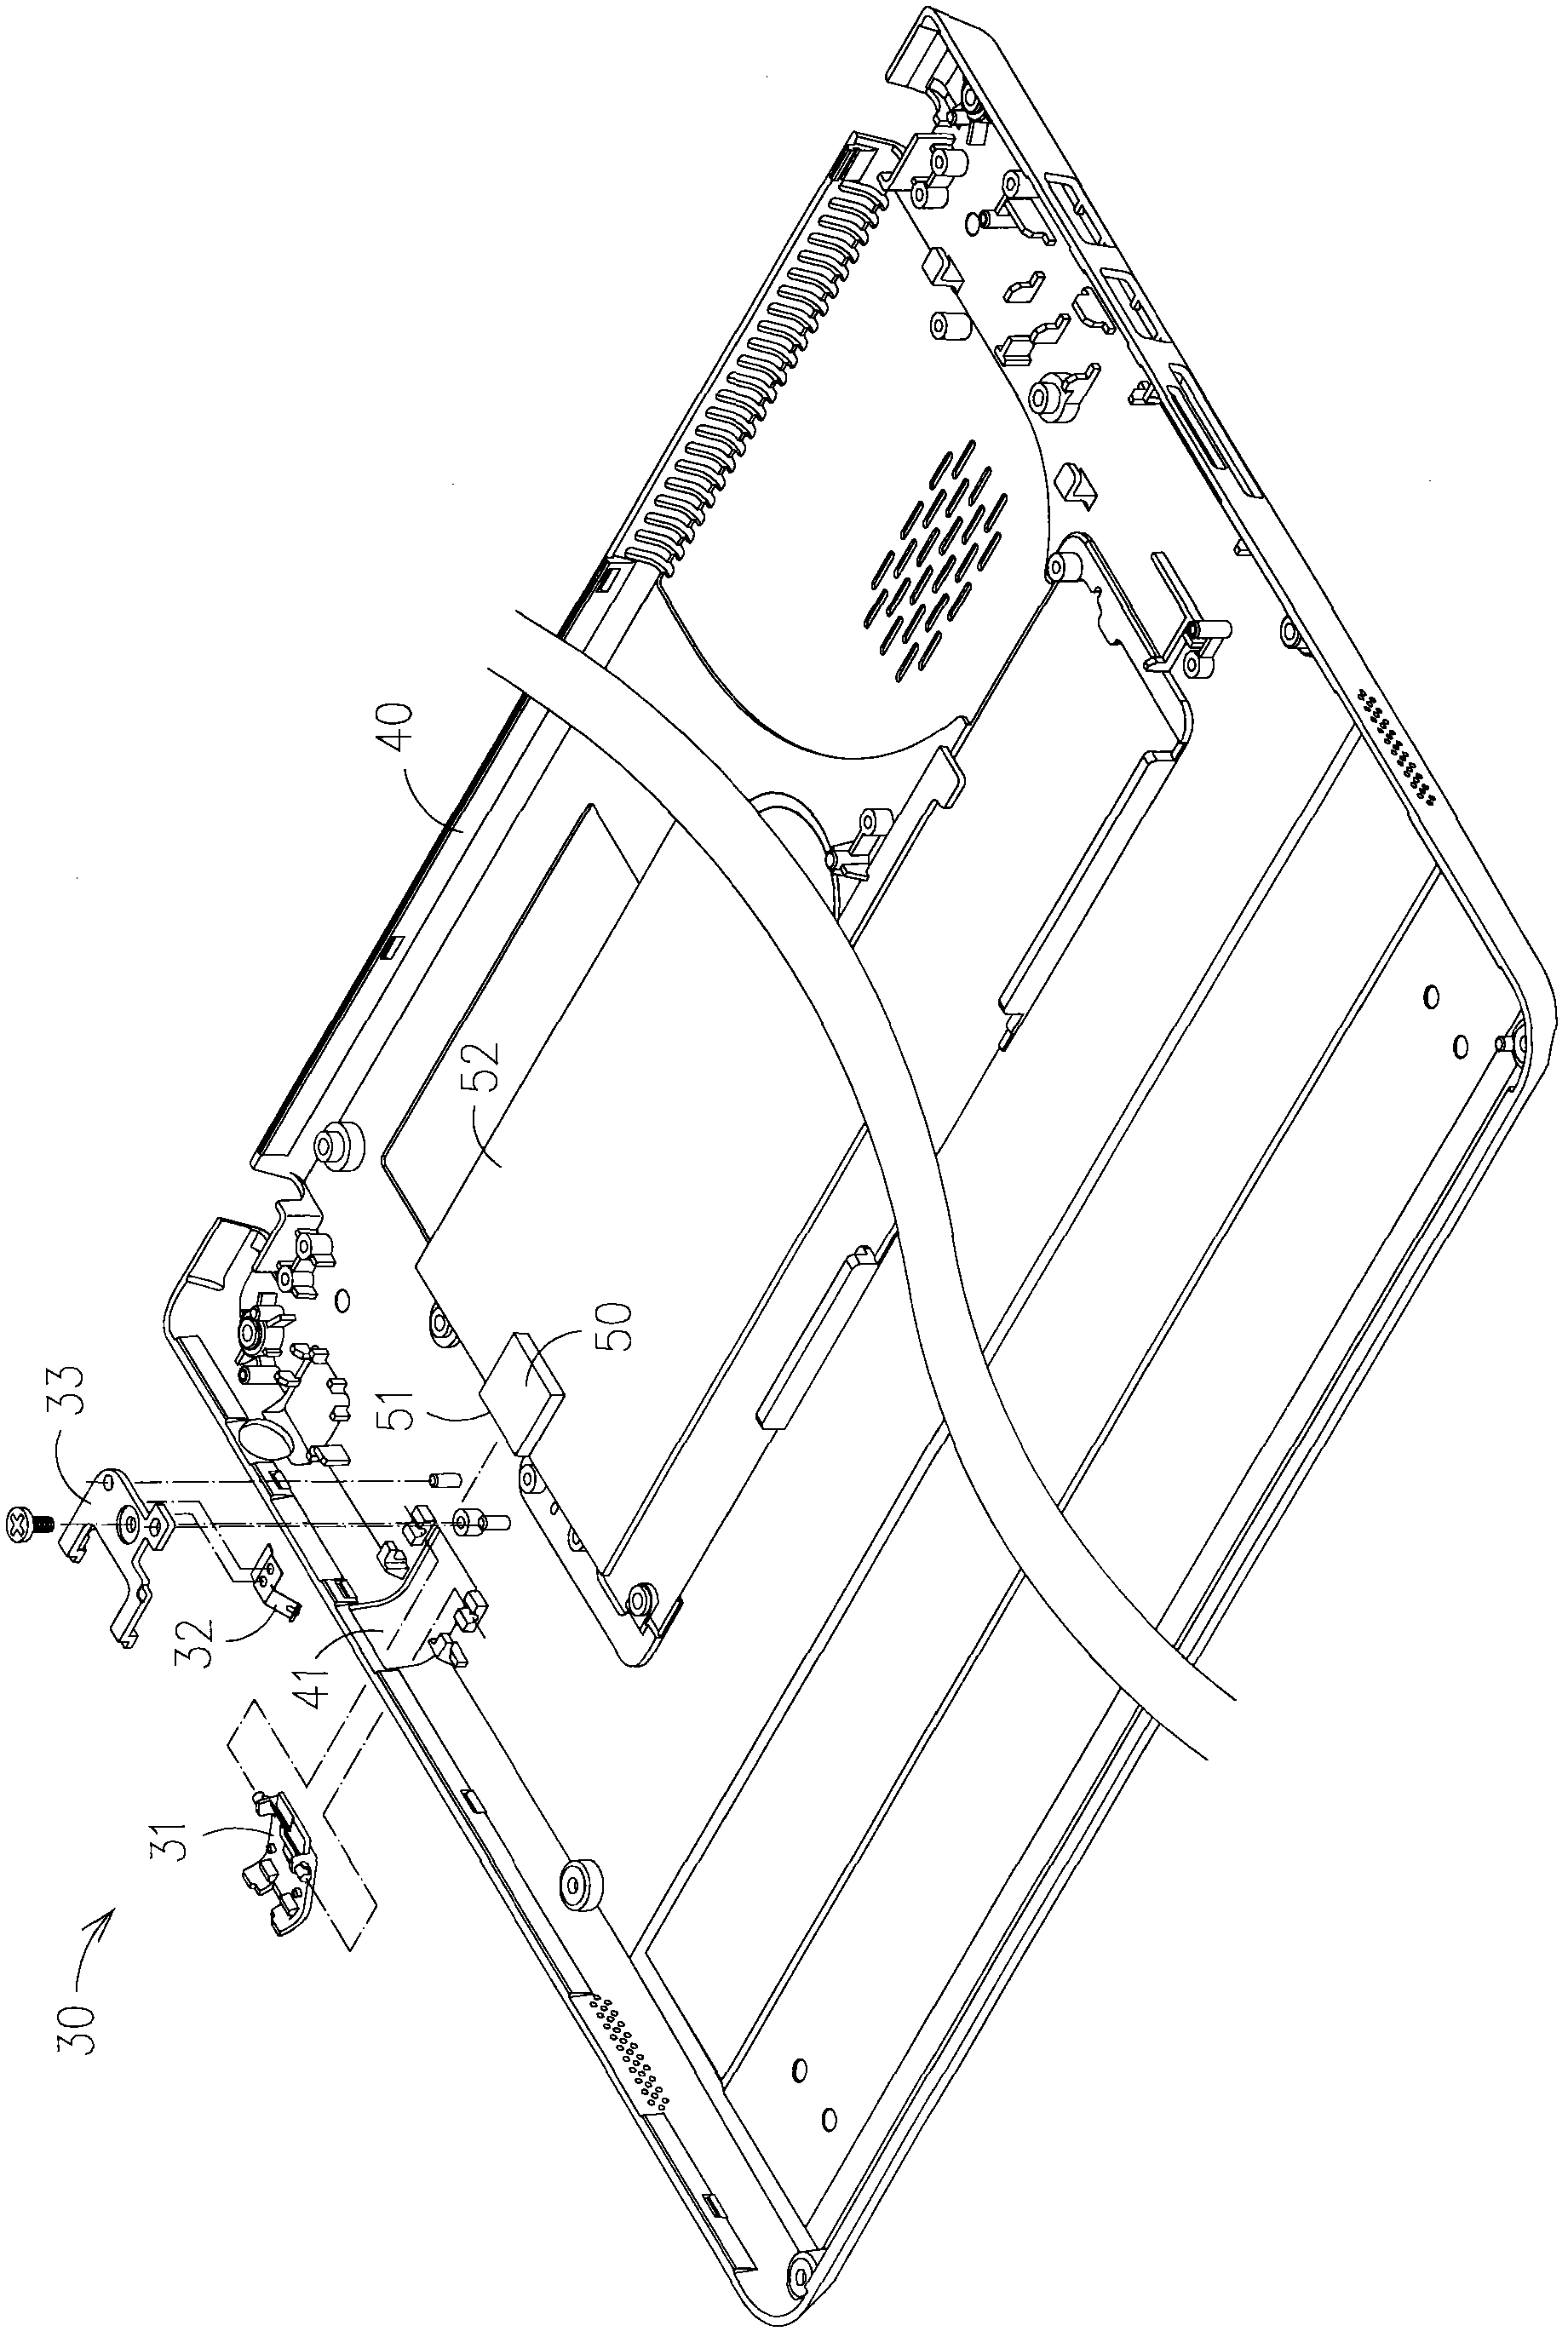 Cover plate structure